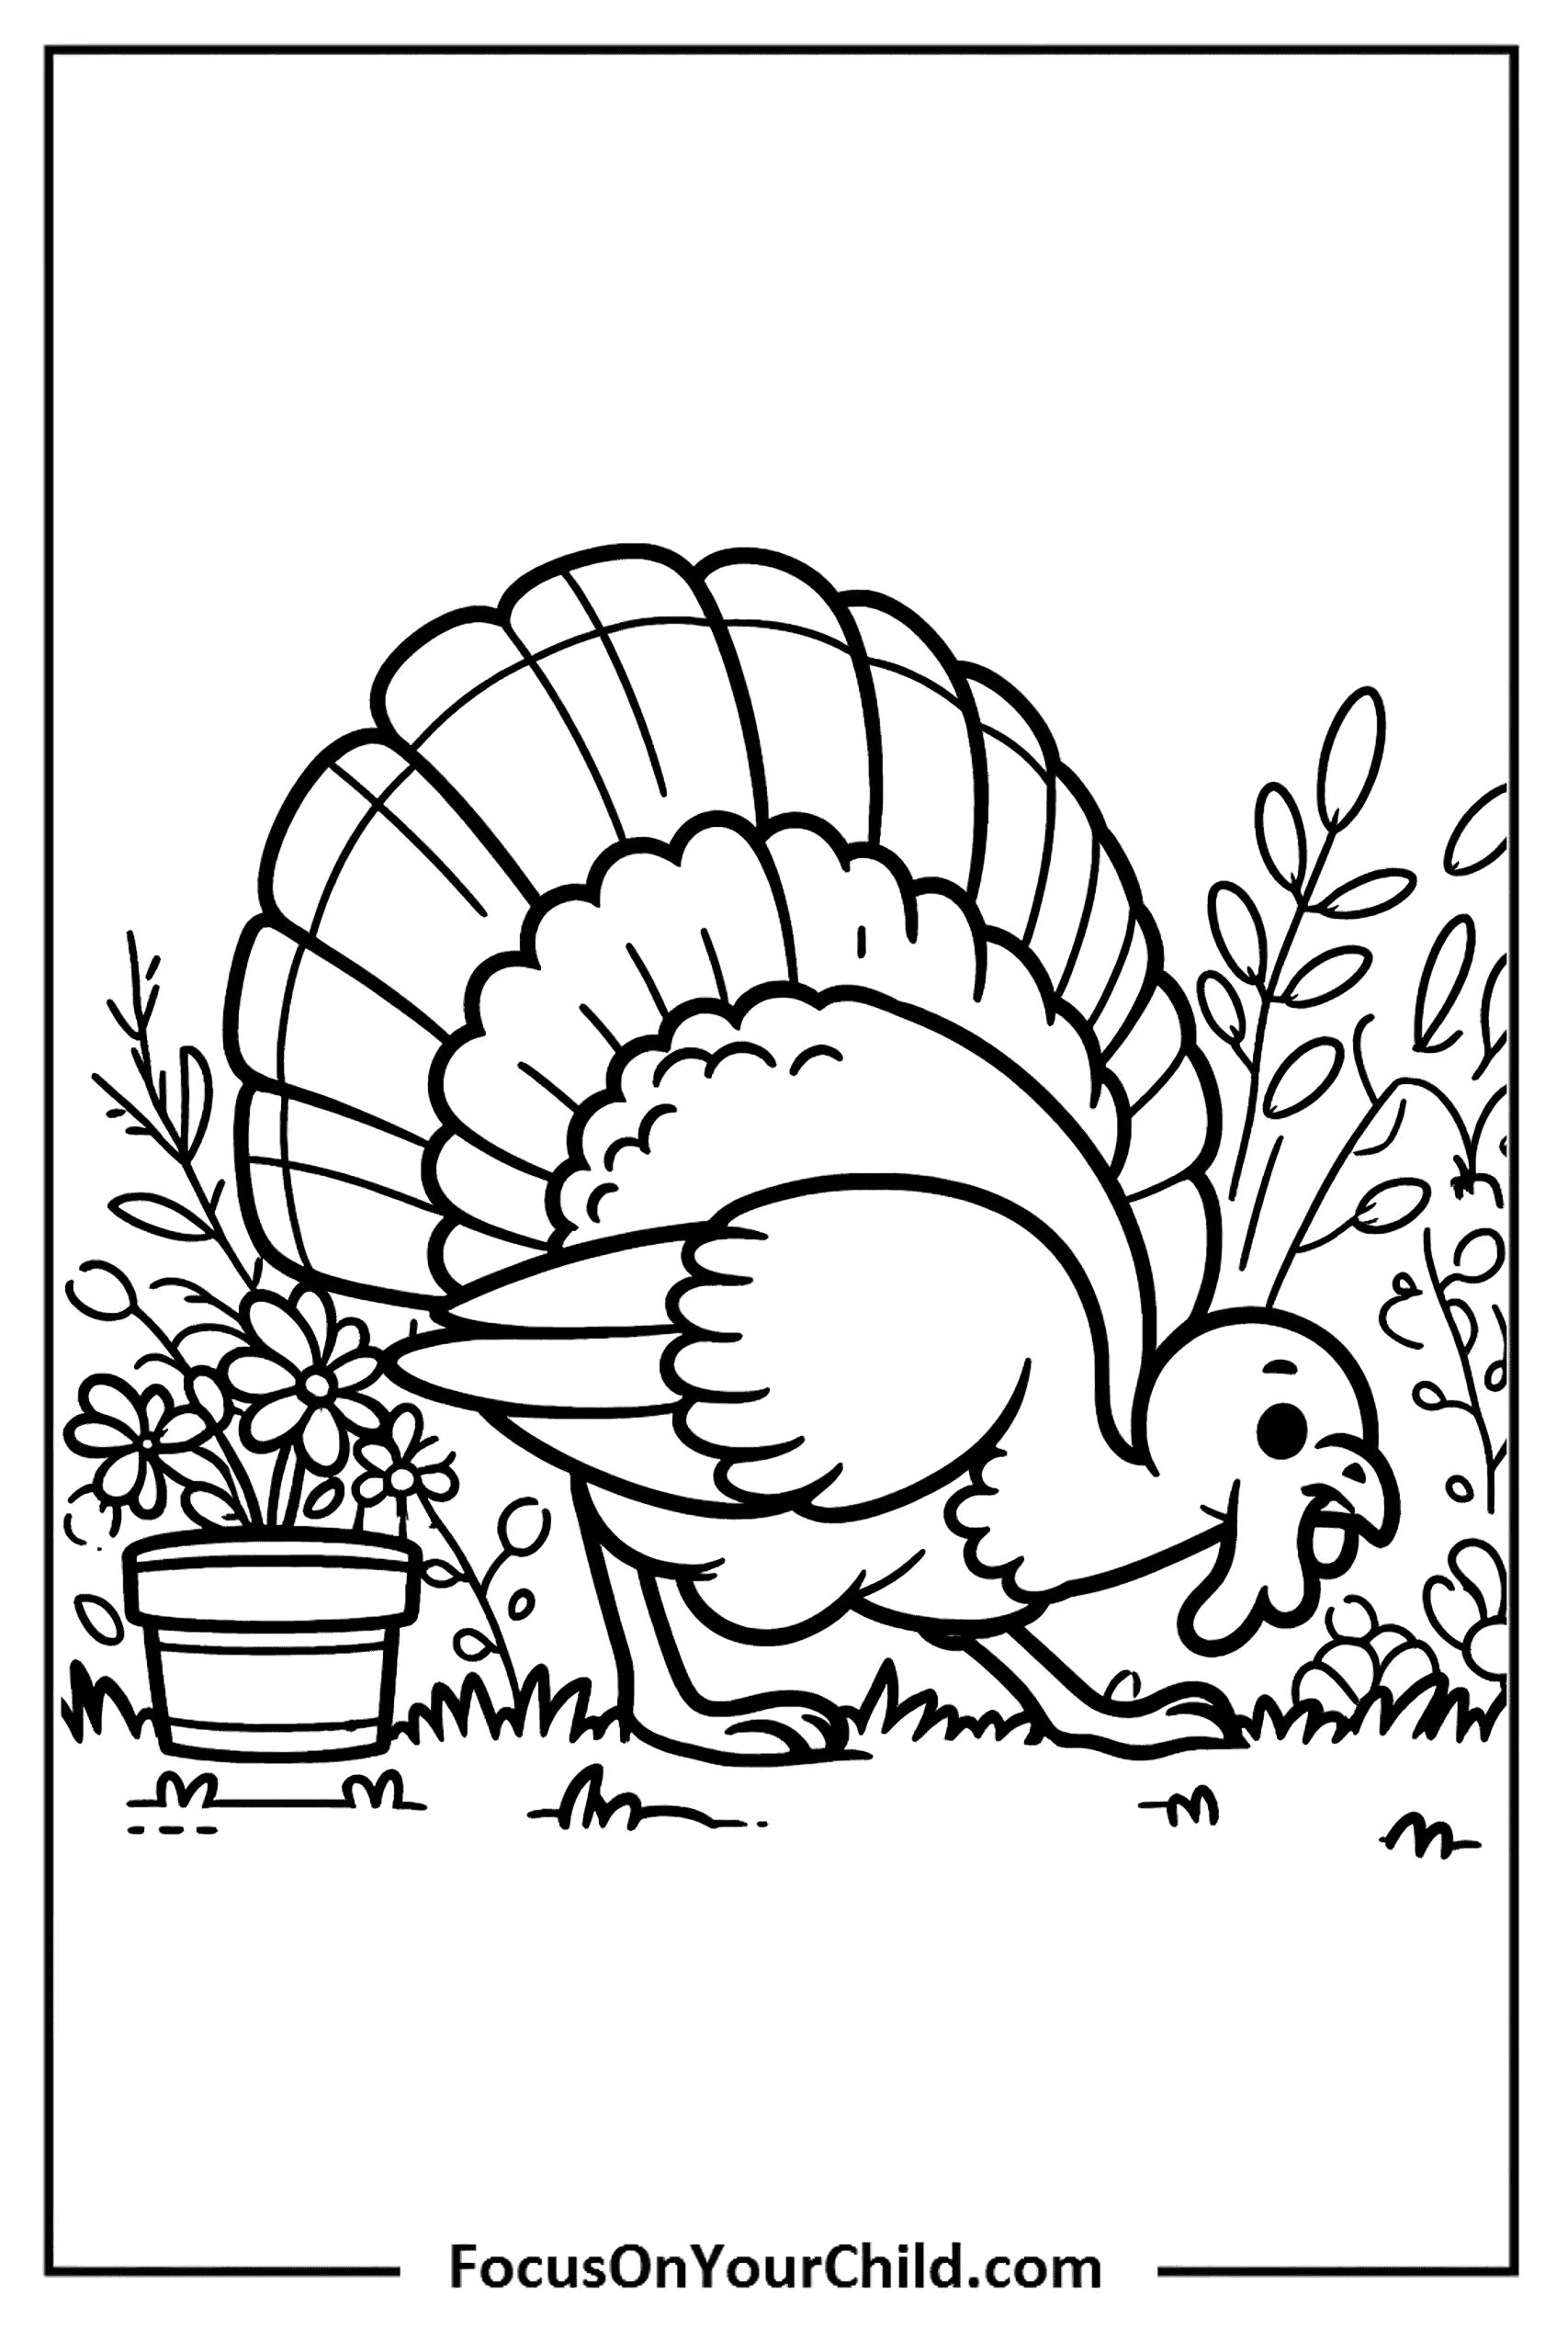 Coloring page of a turkey in a garden setting for children to enjoy.